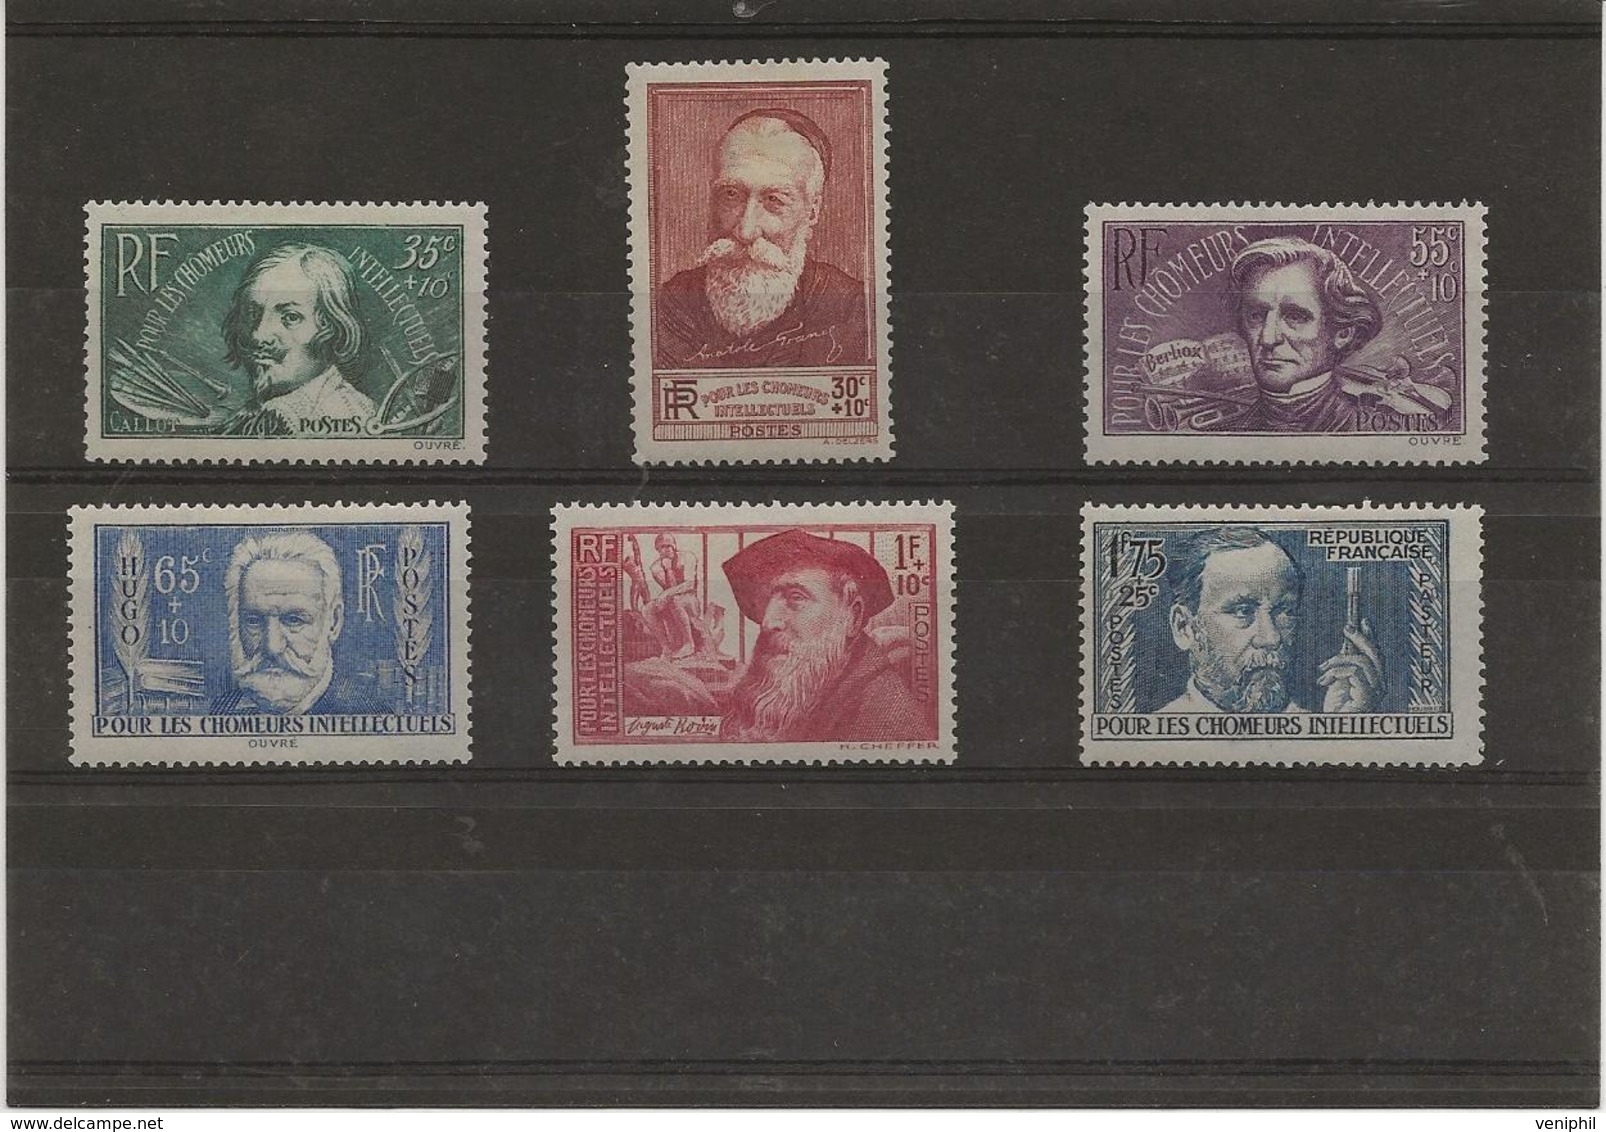 TIMBRES CHOMEURS INTELLECTUELS - N° 380 A 385 NEUF INFIME CHARNIERE - COTE : 45 € - Unused Stamps